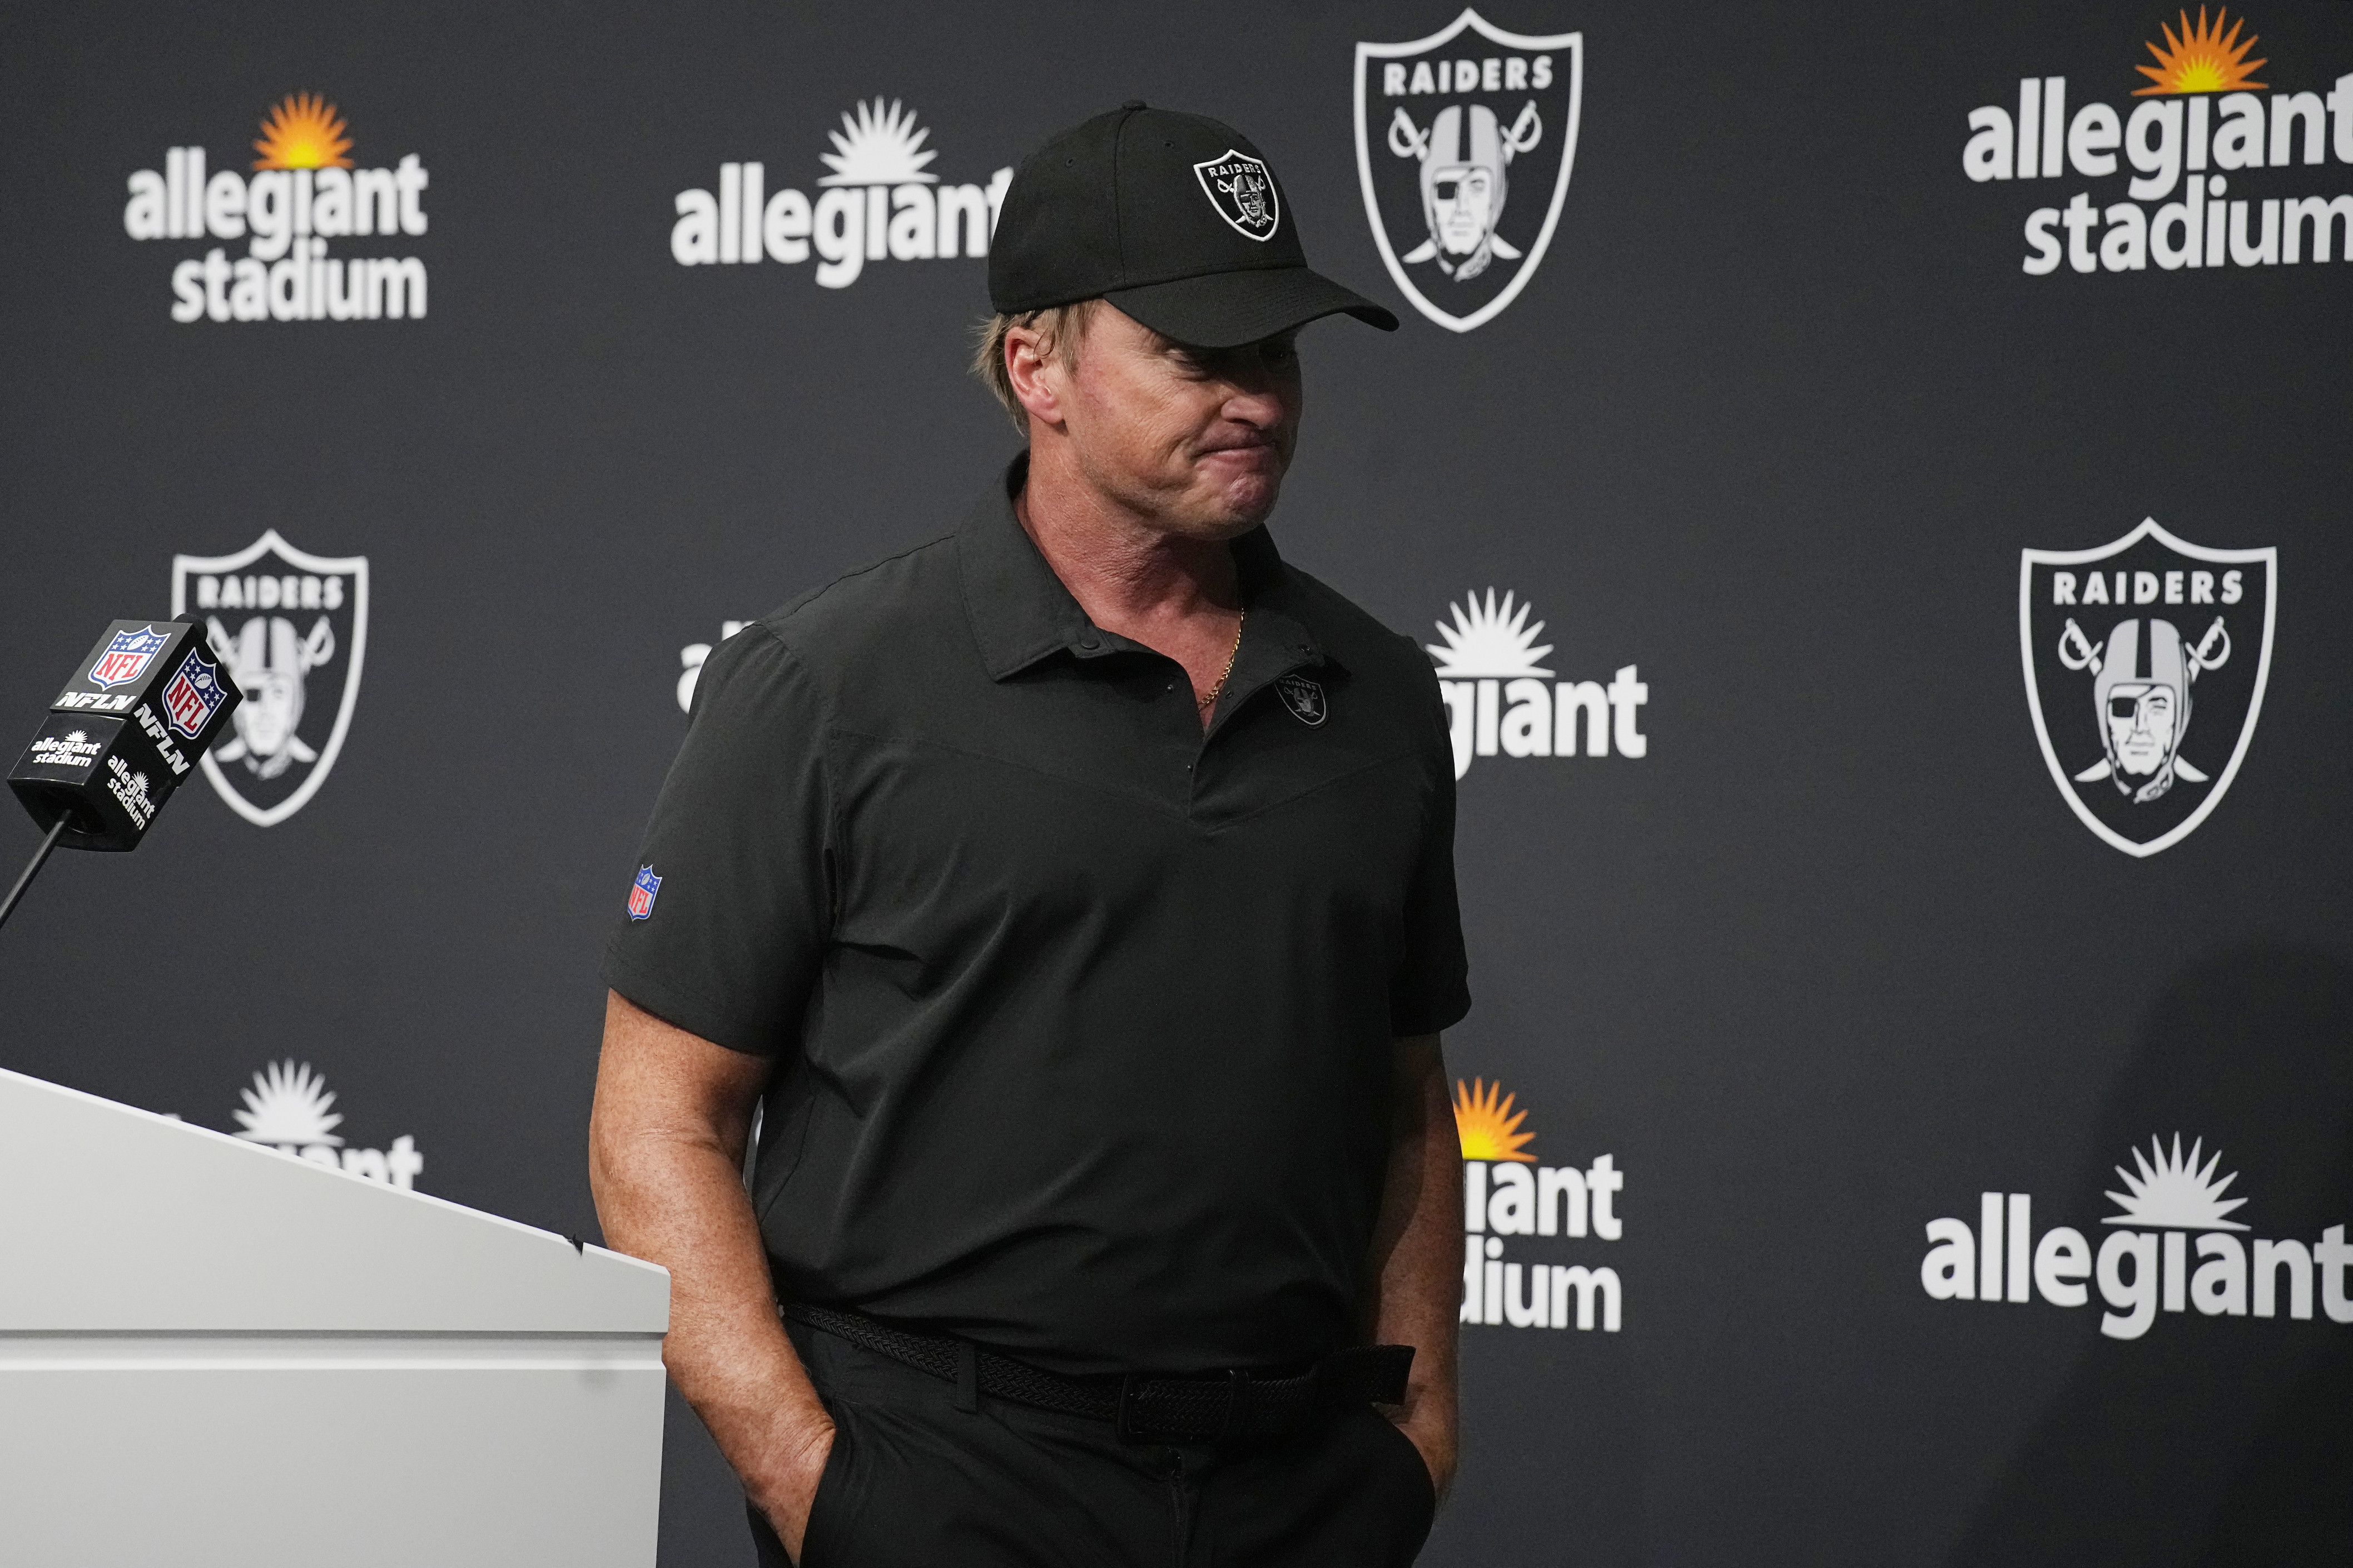 Former Raiders coach Jon Gruden sues NFL over leaked emails